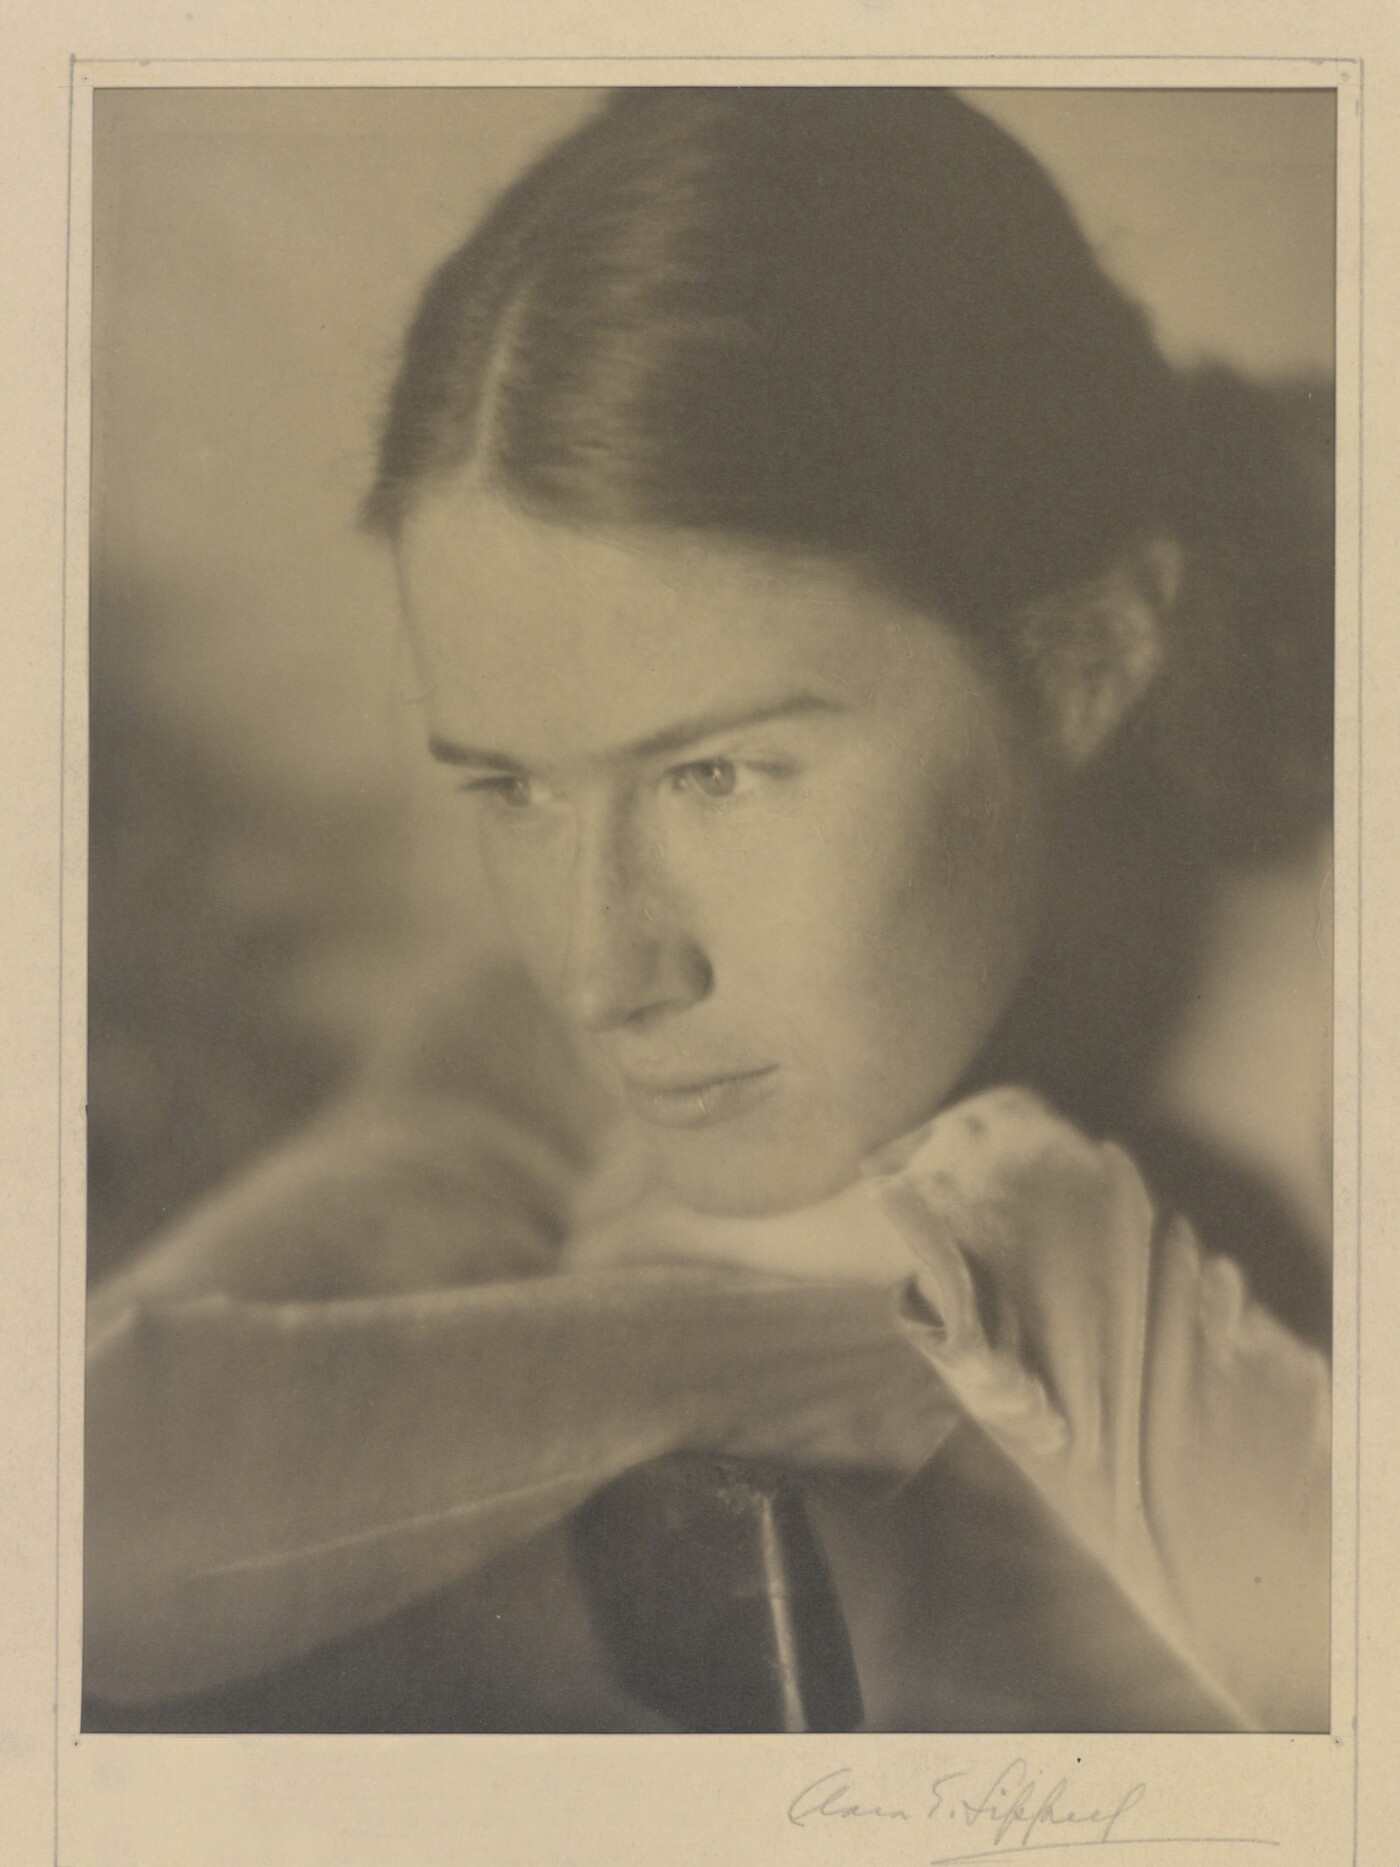 Clara Sipprell (1885-1975); Dorothea Perkins; ca. 1940's - 1950's; Gelatin silver print; Amon Carter Museum of American Art, Fort Worth, Texas, Purchase through gift of The Dorothea Leonhardt Fund of the Communities Foundation of Texas, Inc.; P1984.1.260